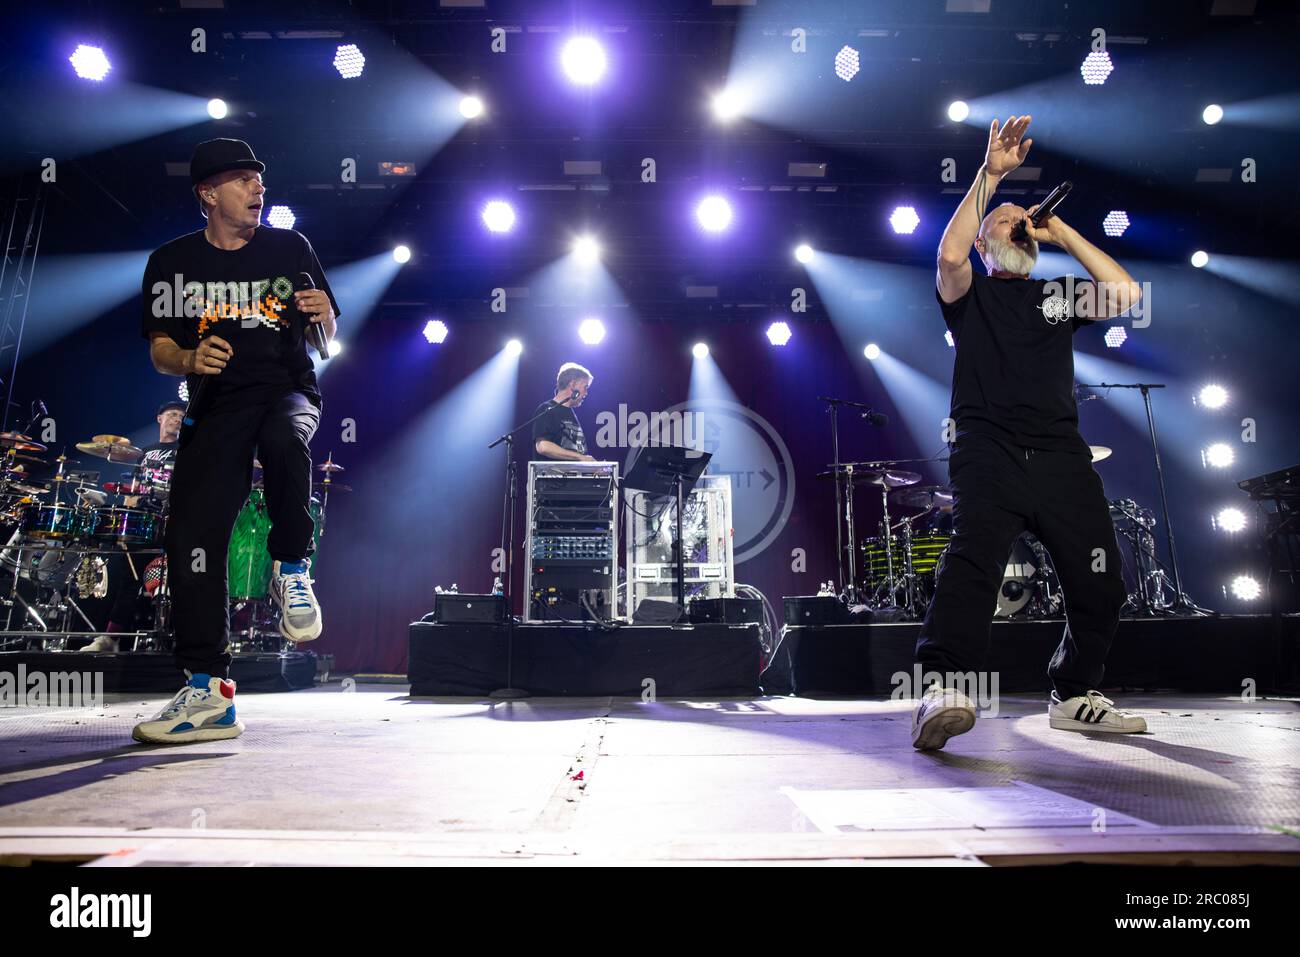 Munich, Germany. 11th July, 2023. Fantastischen Vier live in Munich: The Fantastischen Vier, German HipHop band, deliver a mind-blowing concert experience, captivating the crowd with their electrifying performance. Credit: Valerio Agolino / Alamy Live News Stock Photo